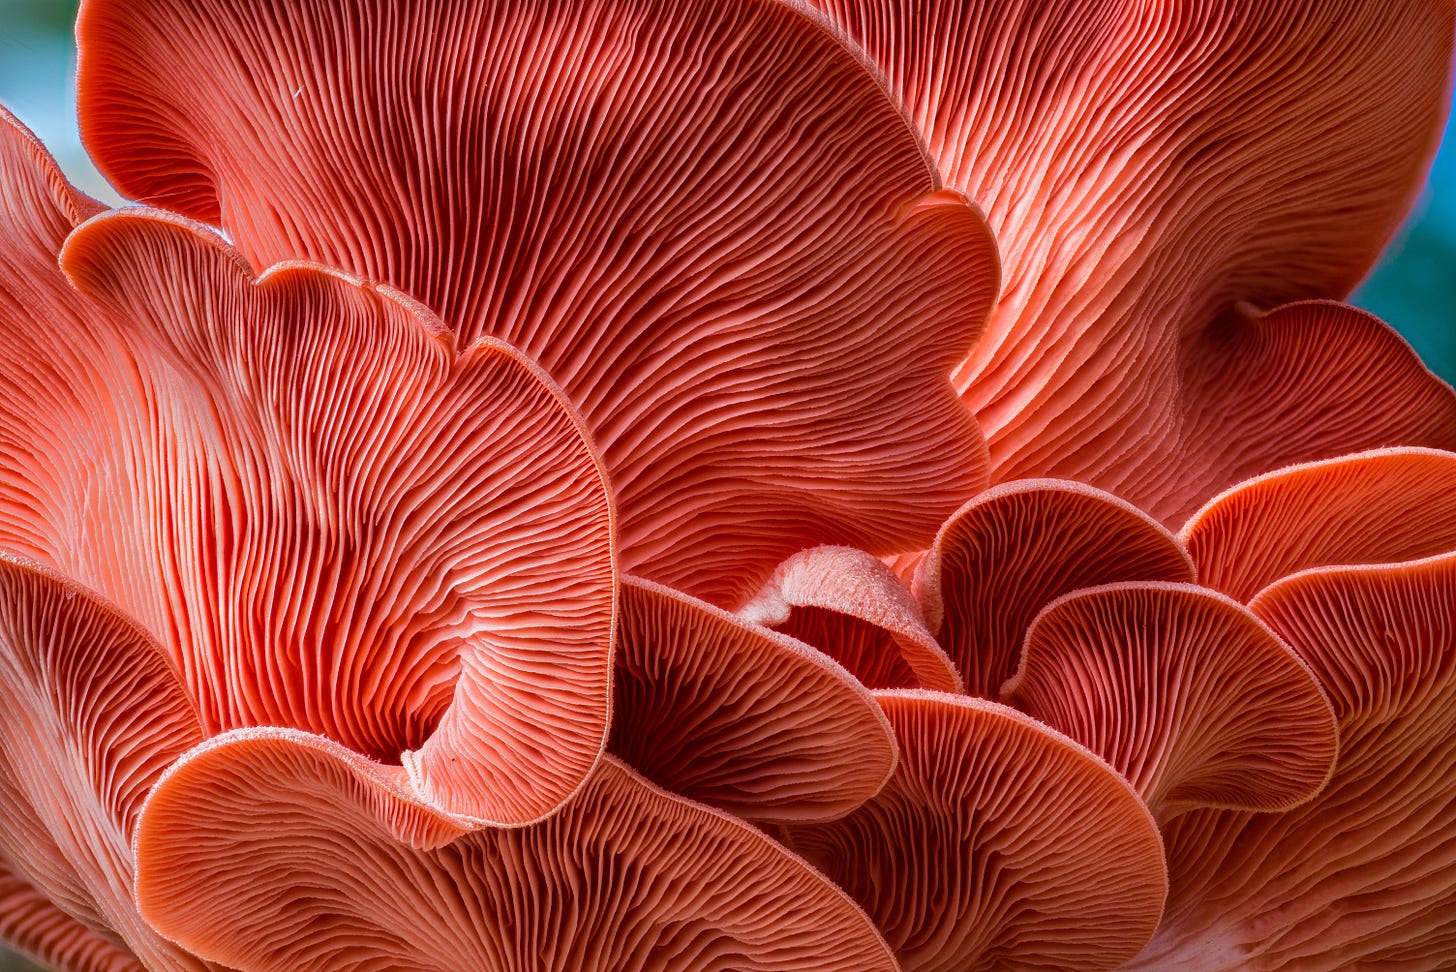 Bright picture of fruiting mushroom bodies